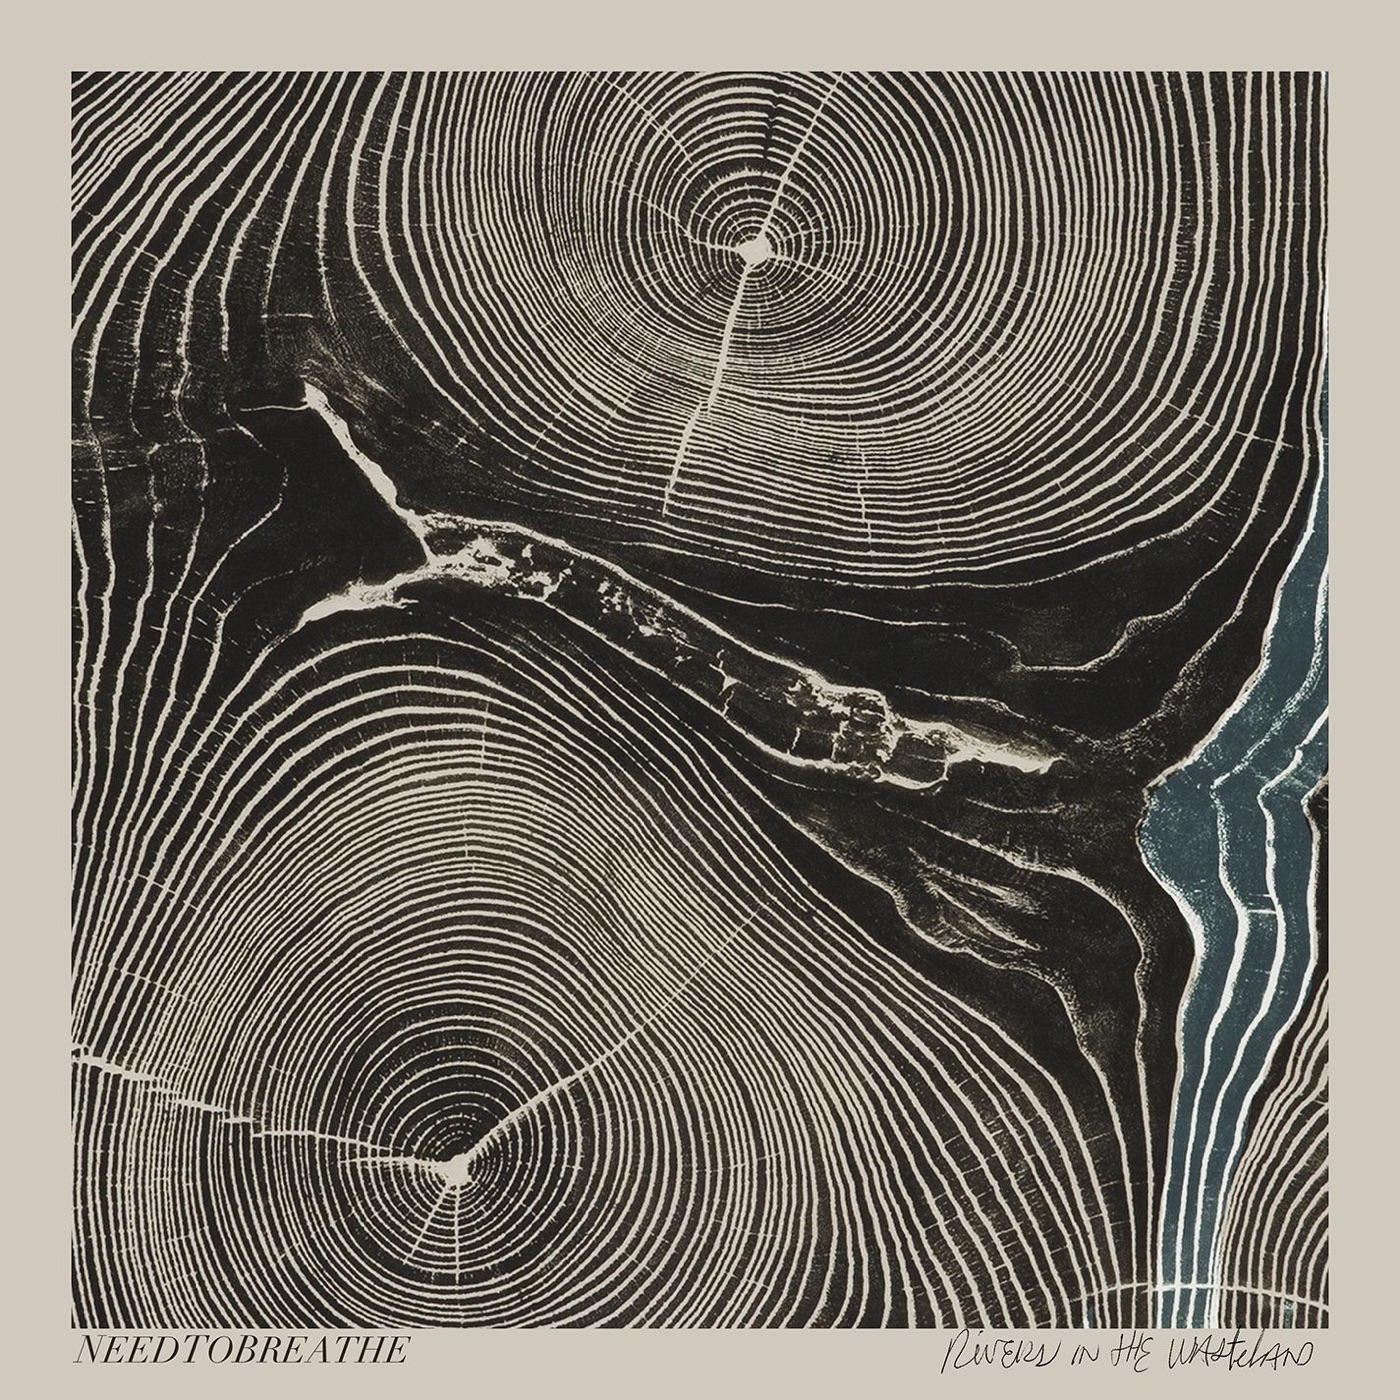 Rivers in the Wasteland by NEEDTOBREATHE